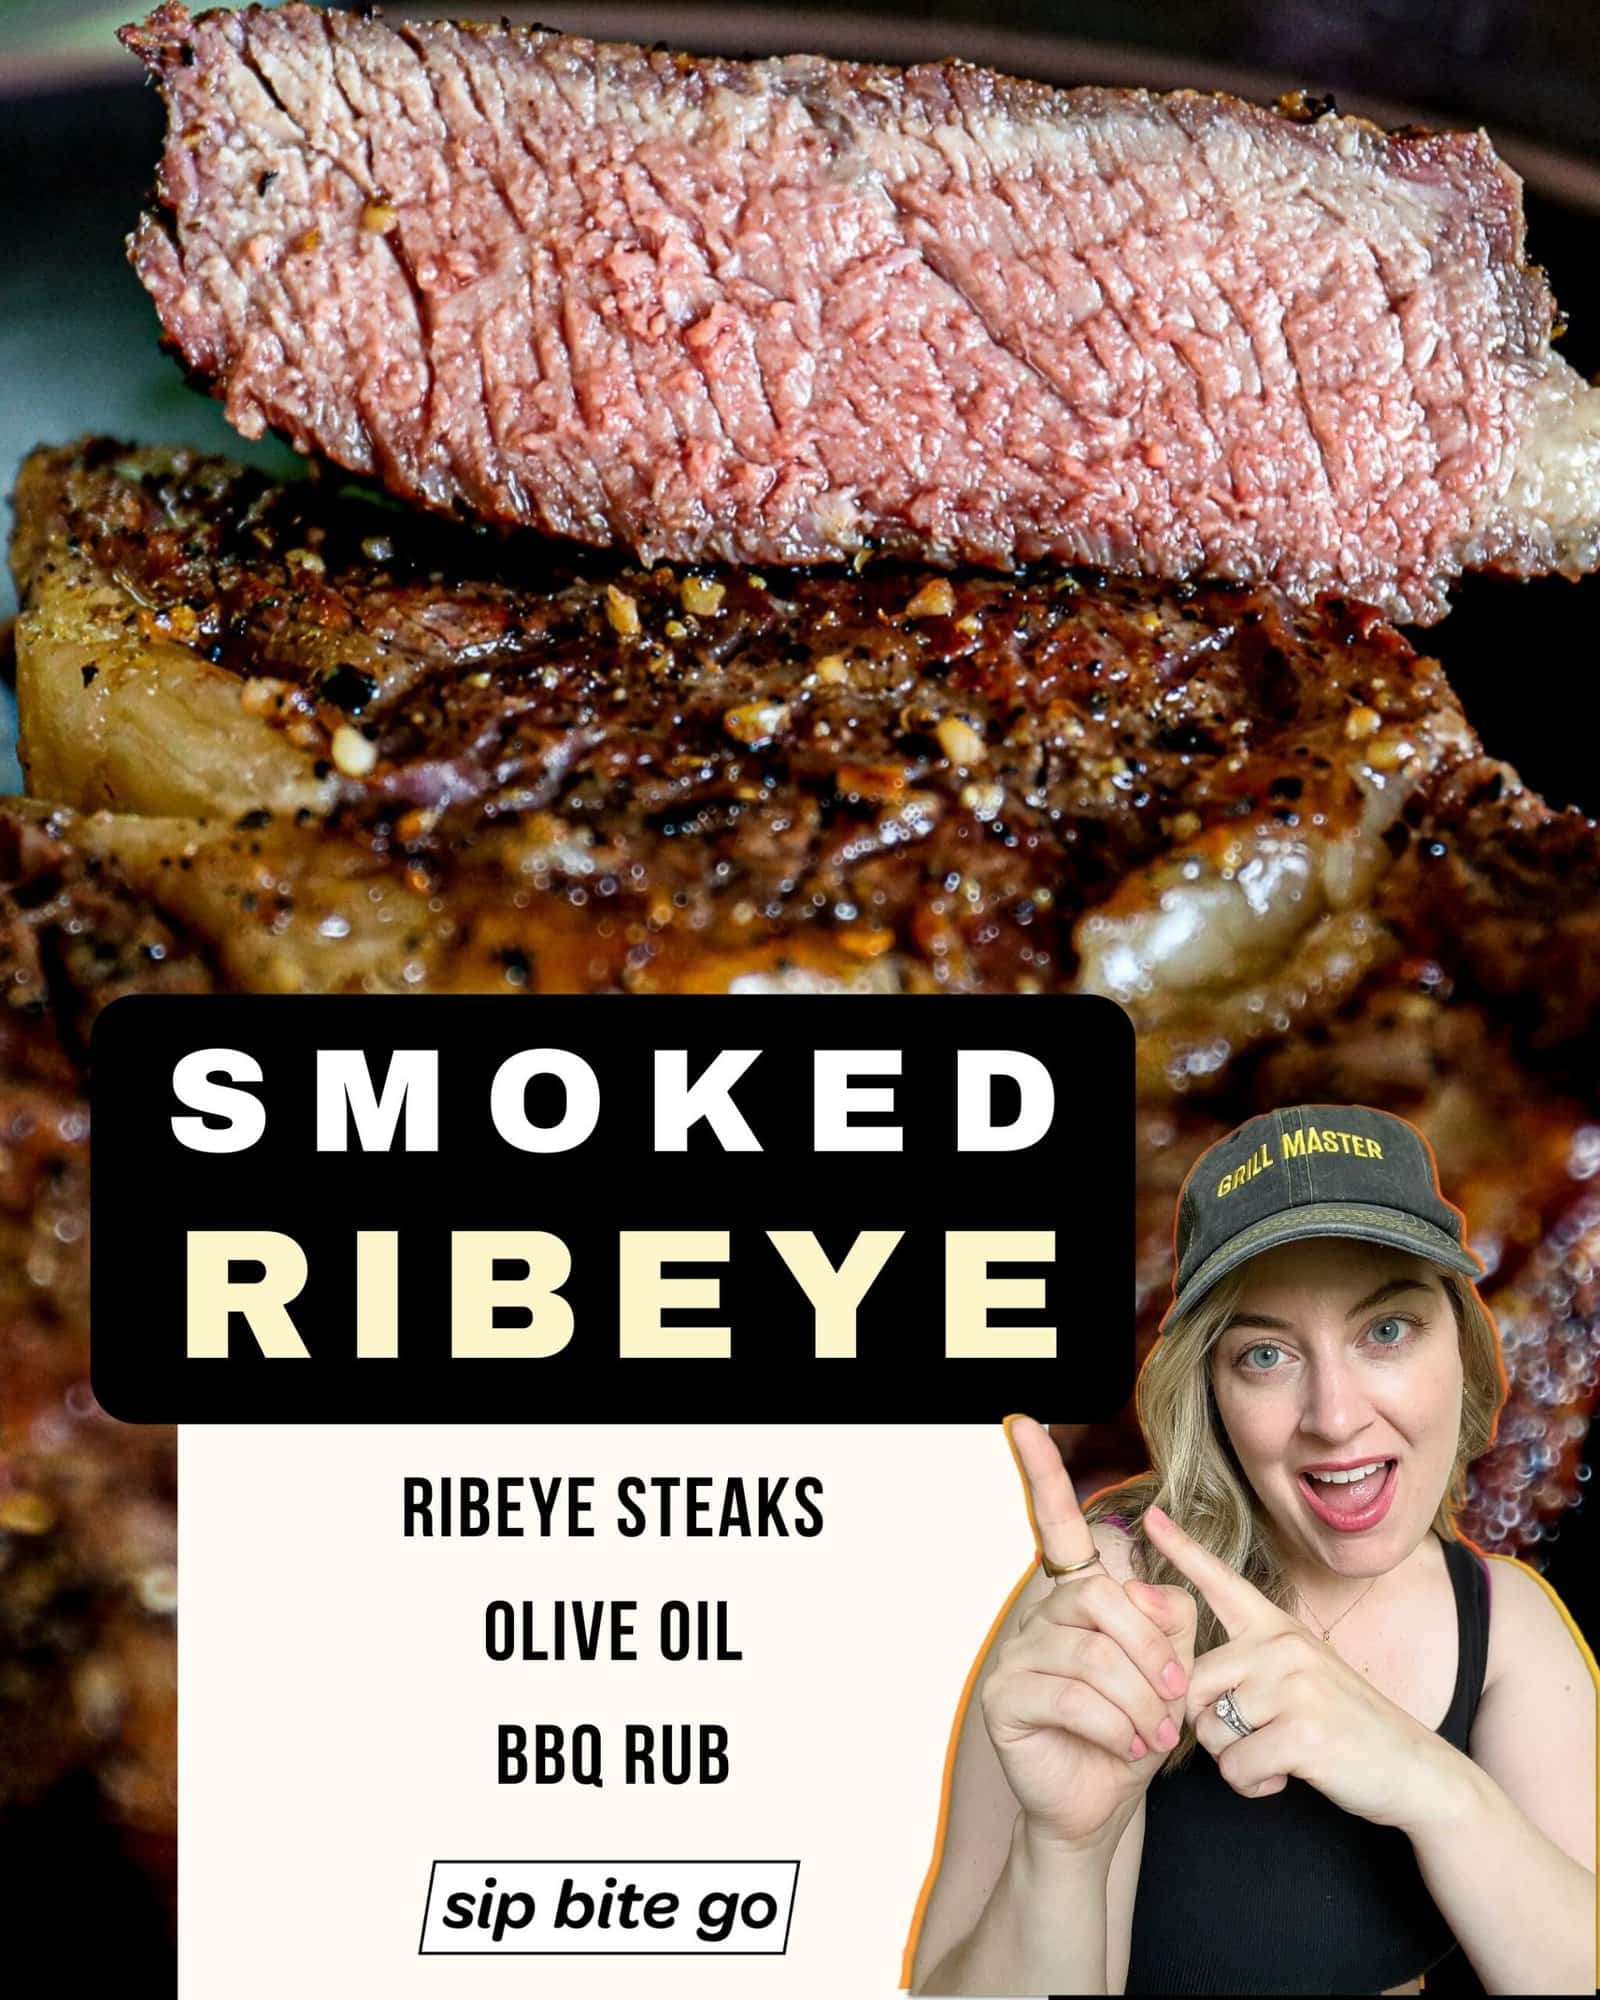 Infographic with ingredients for smoking ribeye steaks on traeger grills